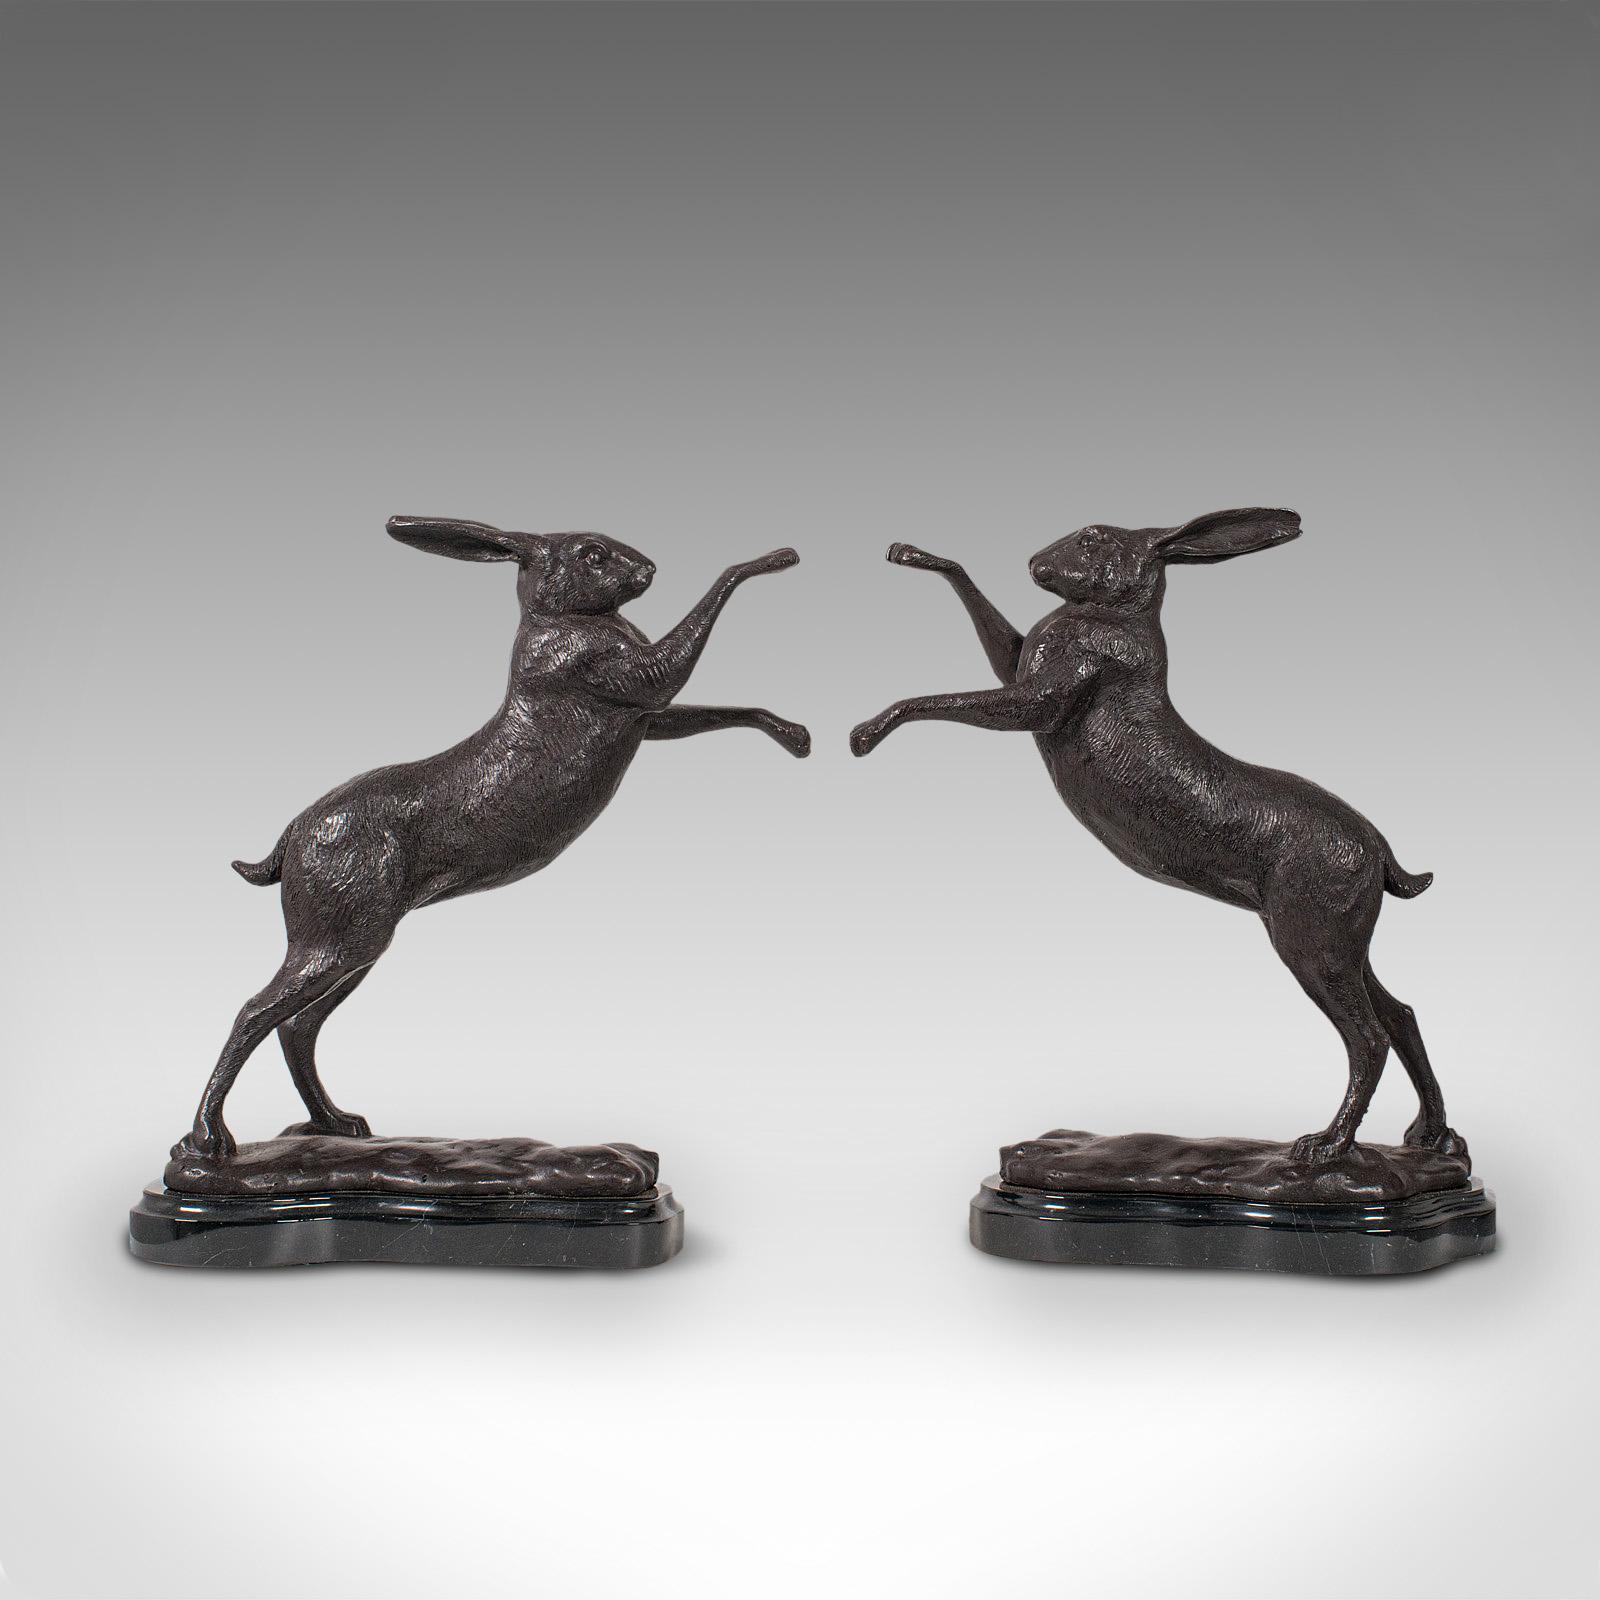 This is a vintage pair of boxing hares. An English, bronze figure of natural interest, ideal as bookends and presented upon marble bases, dating to the mid-20th century, circa 1960.

Choose your corner as the two pugilists ready to go fur and